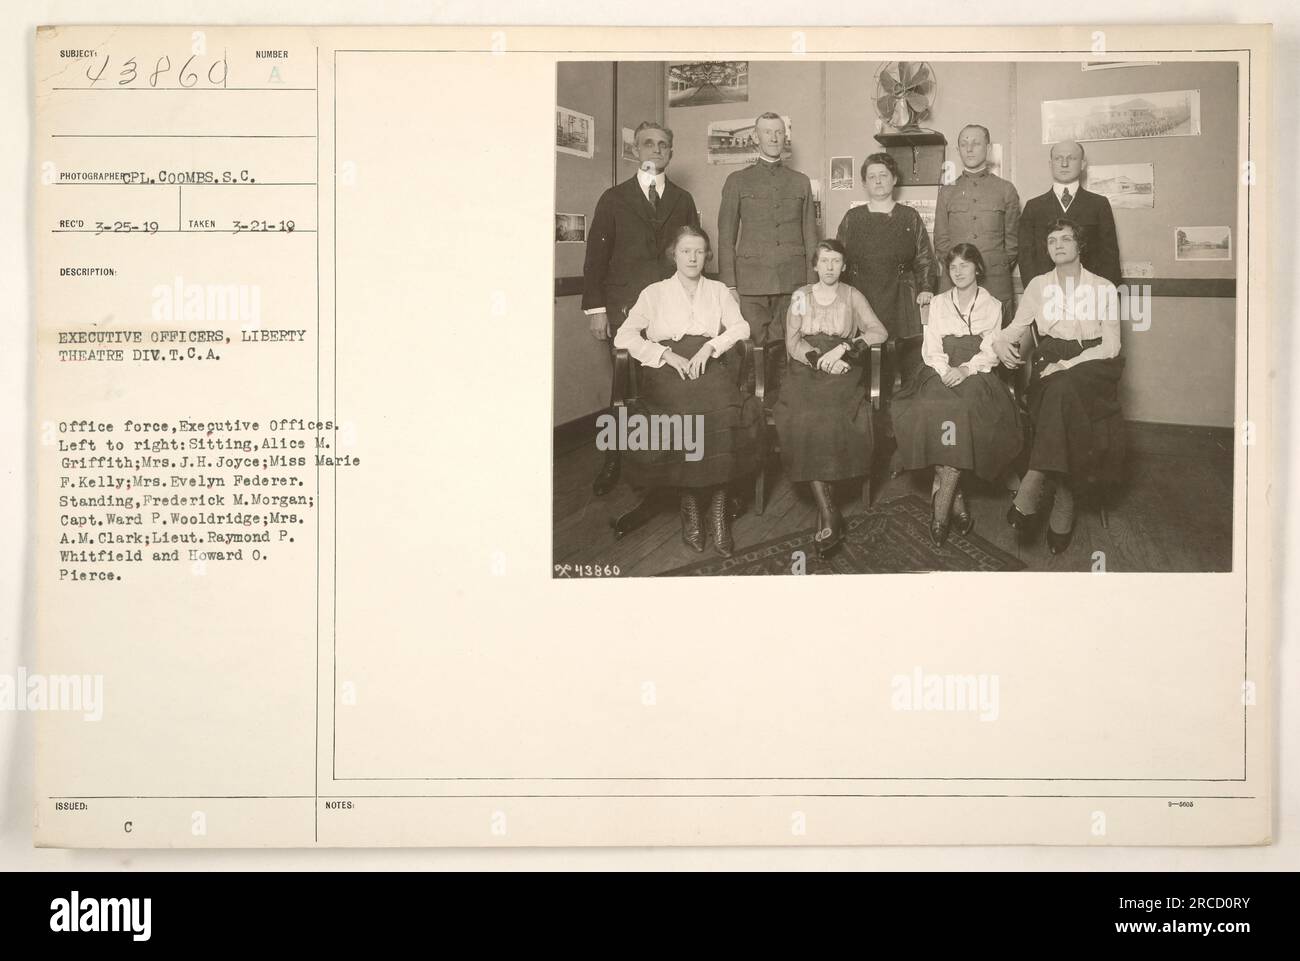 Executive officers of Liberty Theatre Division, T.C.A., pictured in their office on March 21, 1919. From left to right, sitting: Alice M. Griffith, Mrs. J.H. Joyce, Miss Marie F. Kelly, Mrs. Evelyn Federer. Standing: Frederick M. Morgan, Capt. Ward P. Wooldridge, Mrs. A.M. Clark, Lieut. Raymond P. Whitfield, and Howard O. Pierce. Stock Photo